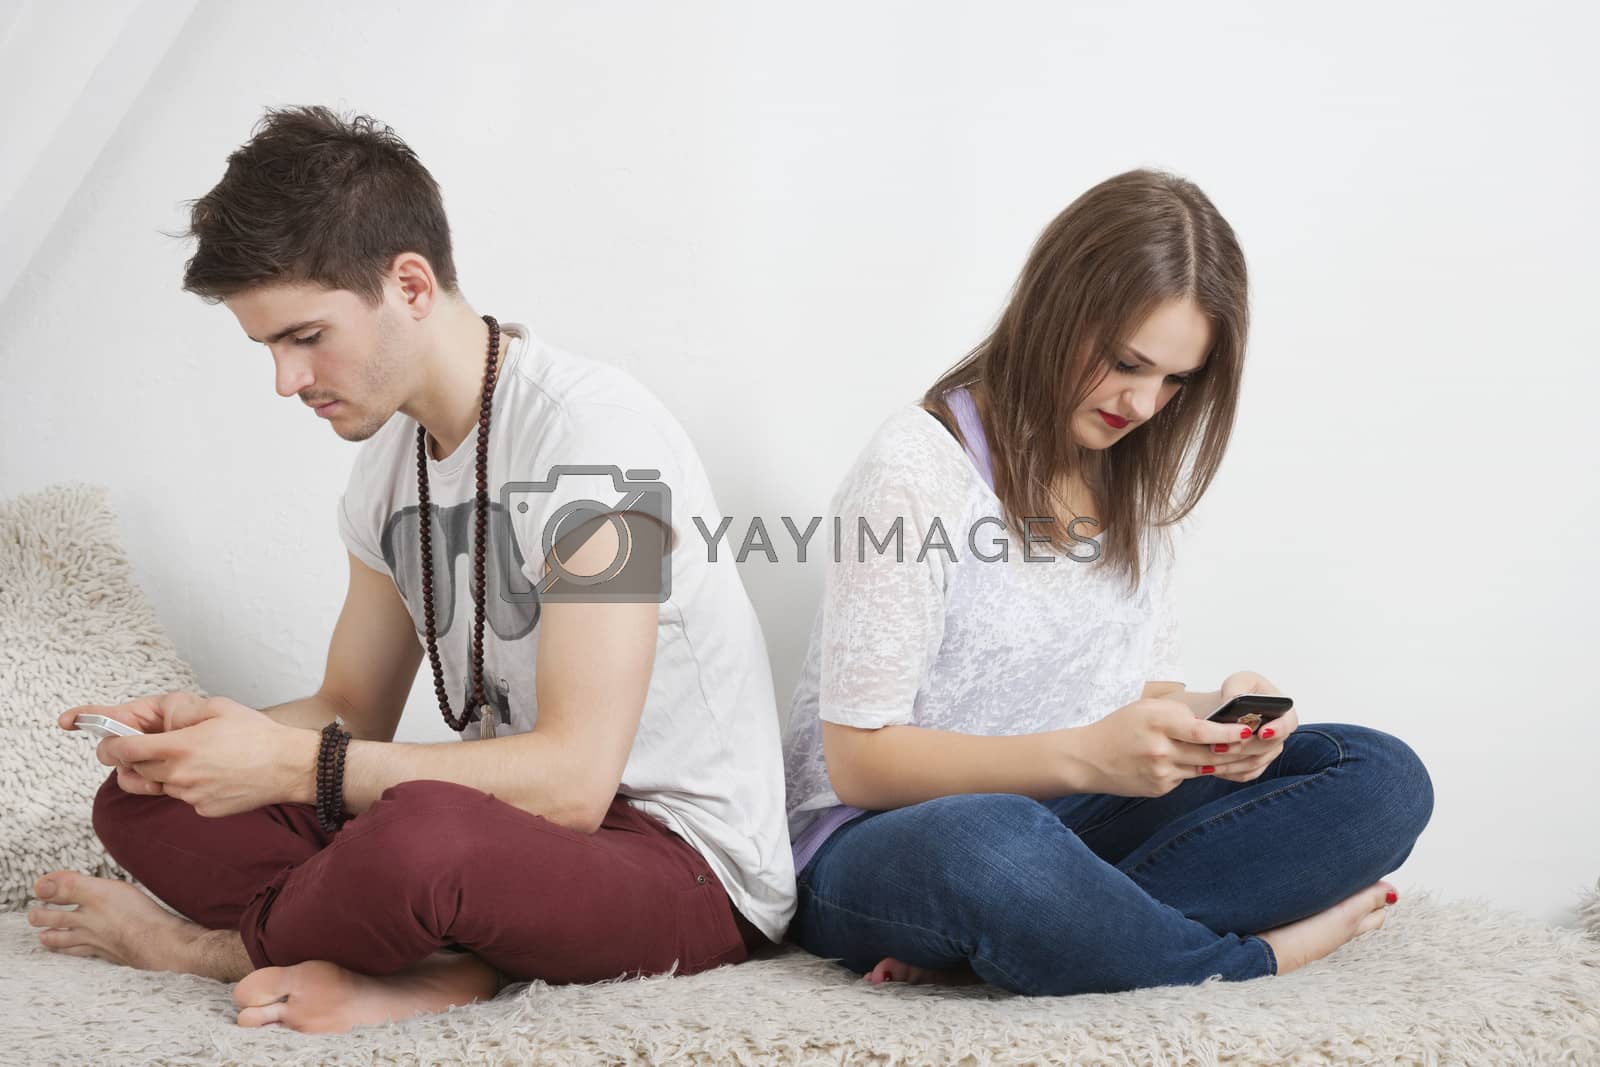 Royalty free image of Friends text messaging with cell phone while sitting on sofa by moodboard